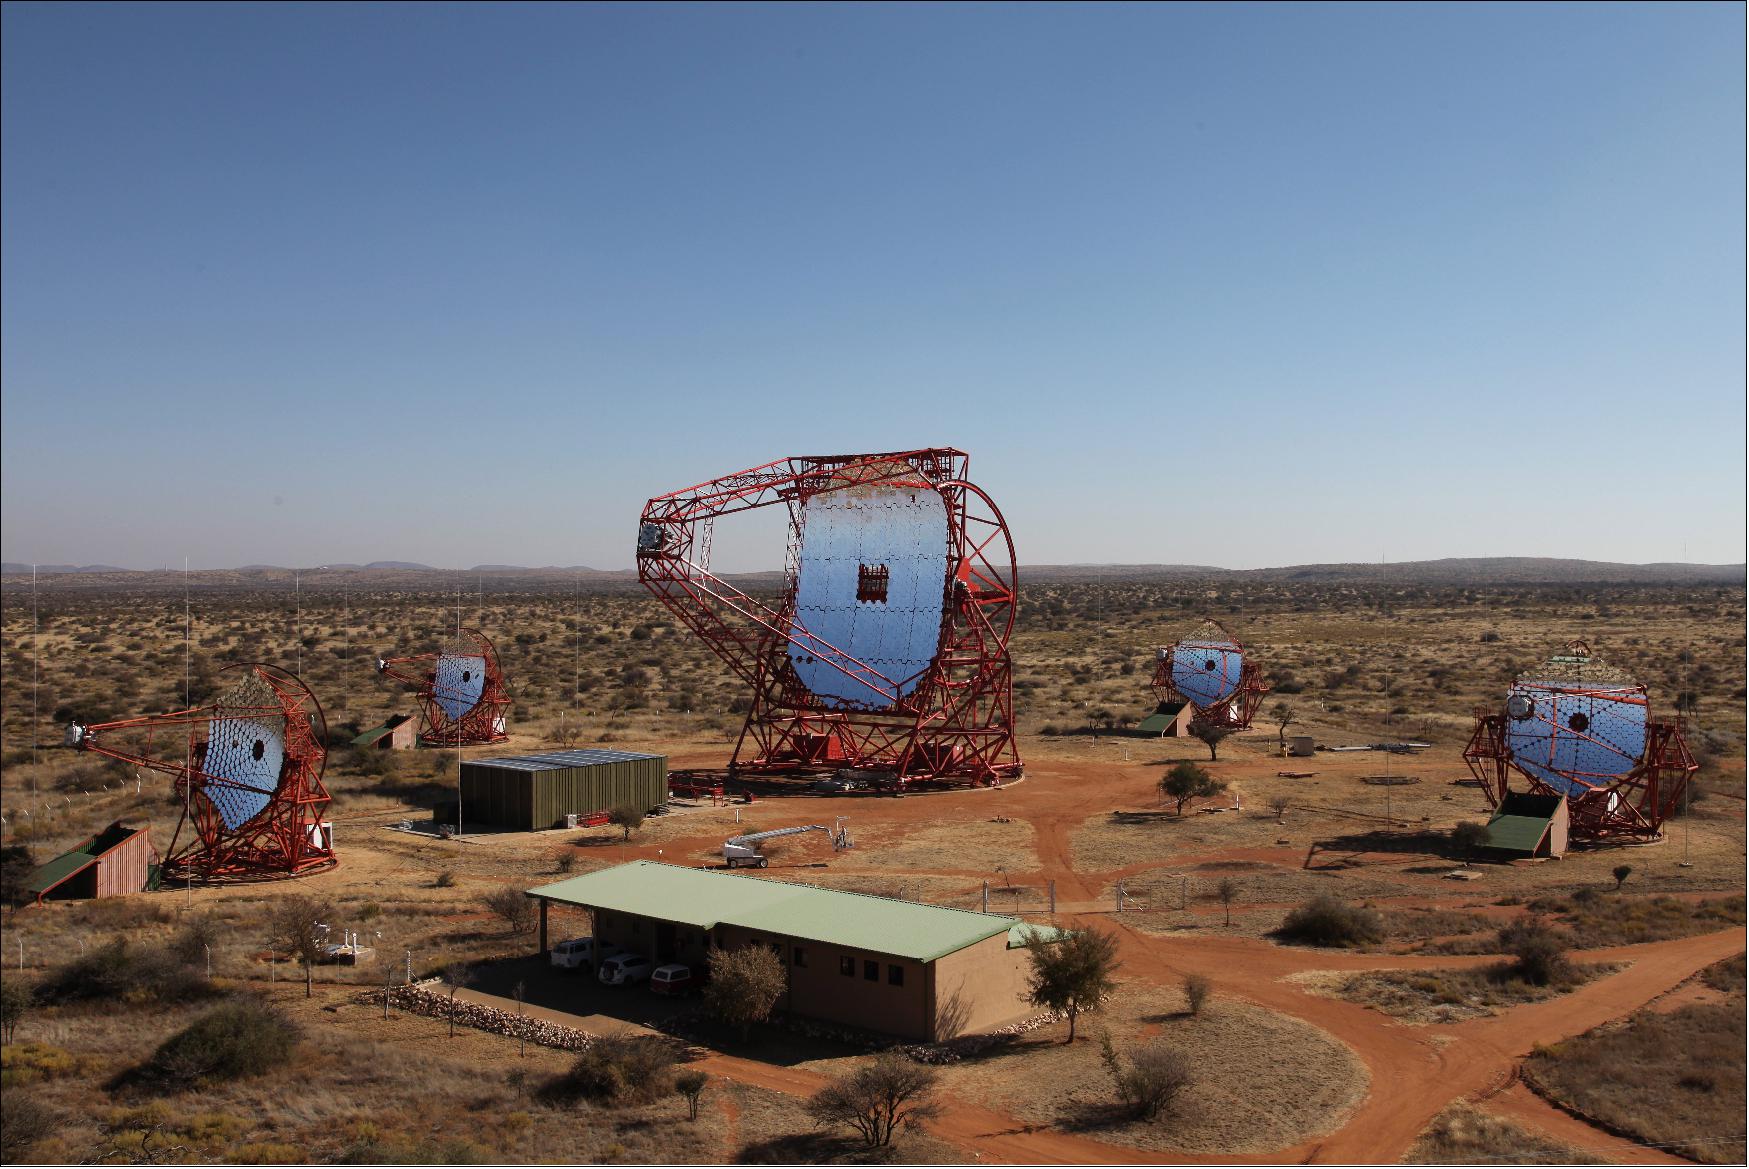 Figure 3: View of the full H.E.S.S. array with the four 12 m telescopes and the new 28 m H.E.S.S. II telescope in Namibia (image credit: H.E.S.S. Collaboration, Clementina Medina, Ref. 6)